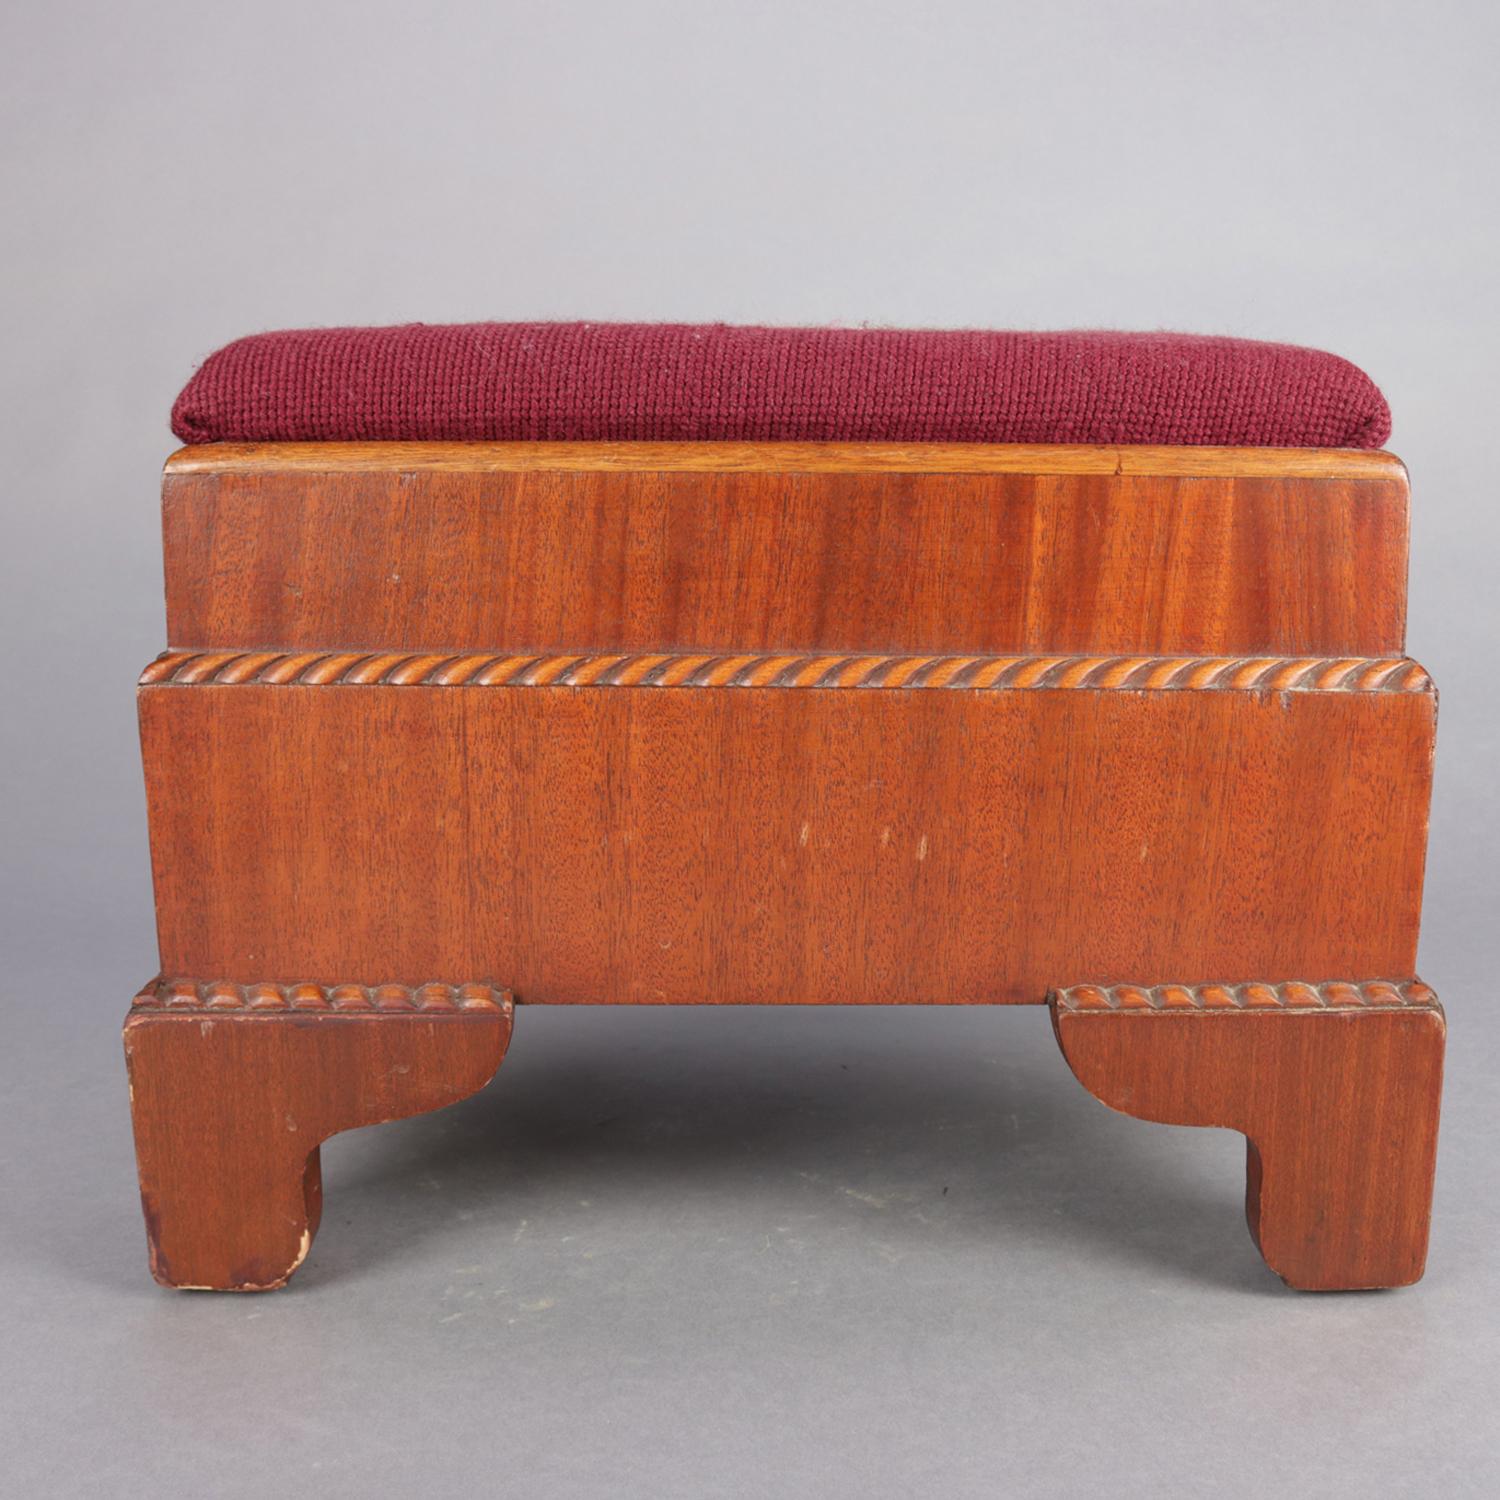 Antique American Empire footstool features mahogany construction in stepped form with carved rope twist trimming, needlepoint upholstered seat with central rose floral spray, and raised on ogee feet, 20th century.


Measures: 12